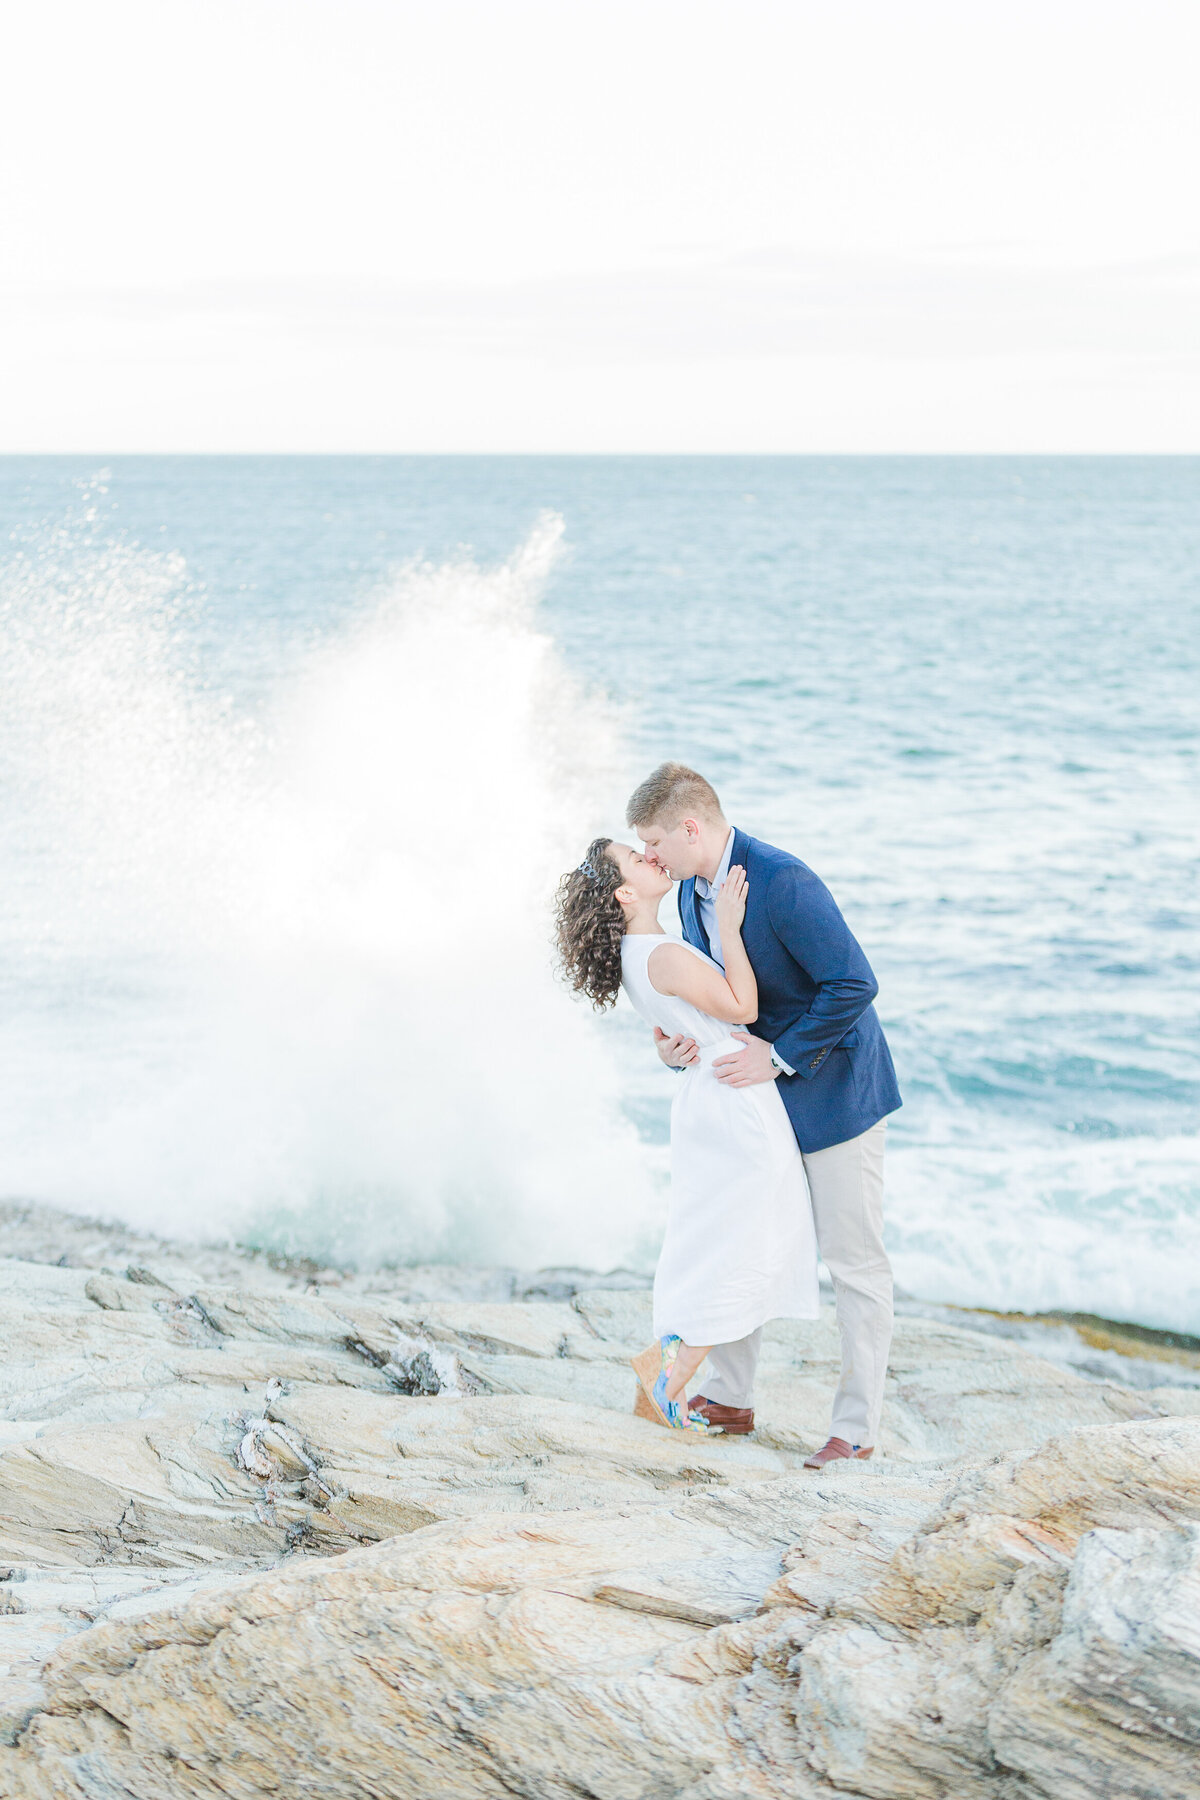 A couple stands on the rocky cliffs of Beavertail Lighthouse for their engagement photos. They have their arms wrapped around each other and share a kiss as the waves crash and create a spray behind them. Captured by best Rhode Island Wedding Photographer Lia Rose Weddings